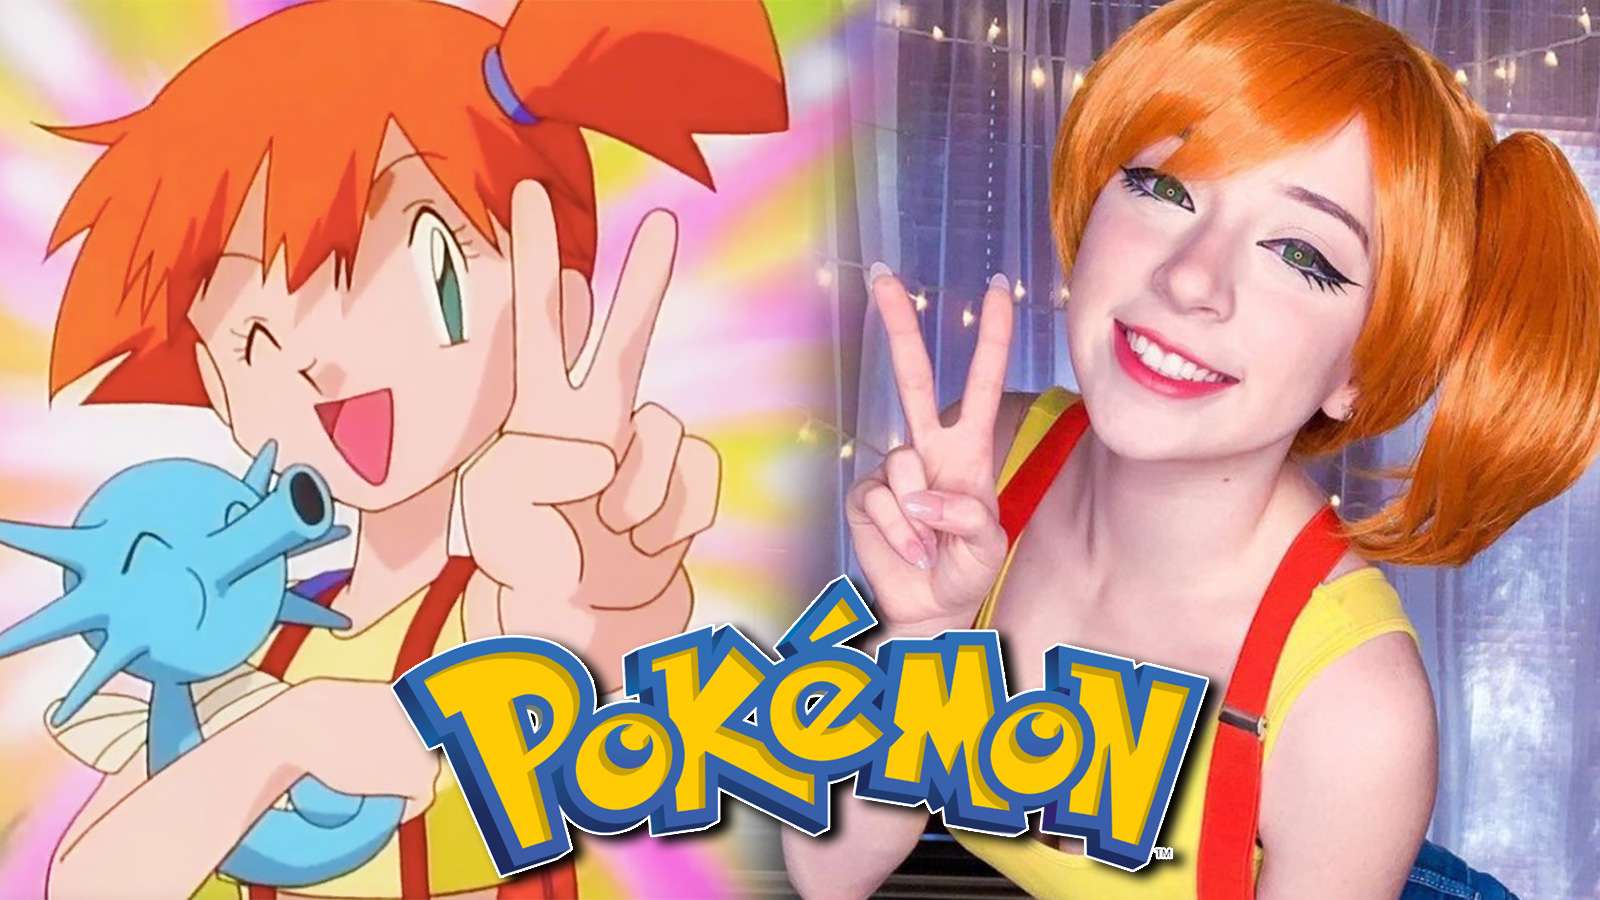 Screenshot of Misty from the Pokemon anime next to cosplayer with Pokemon Logo.